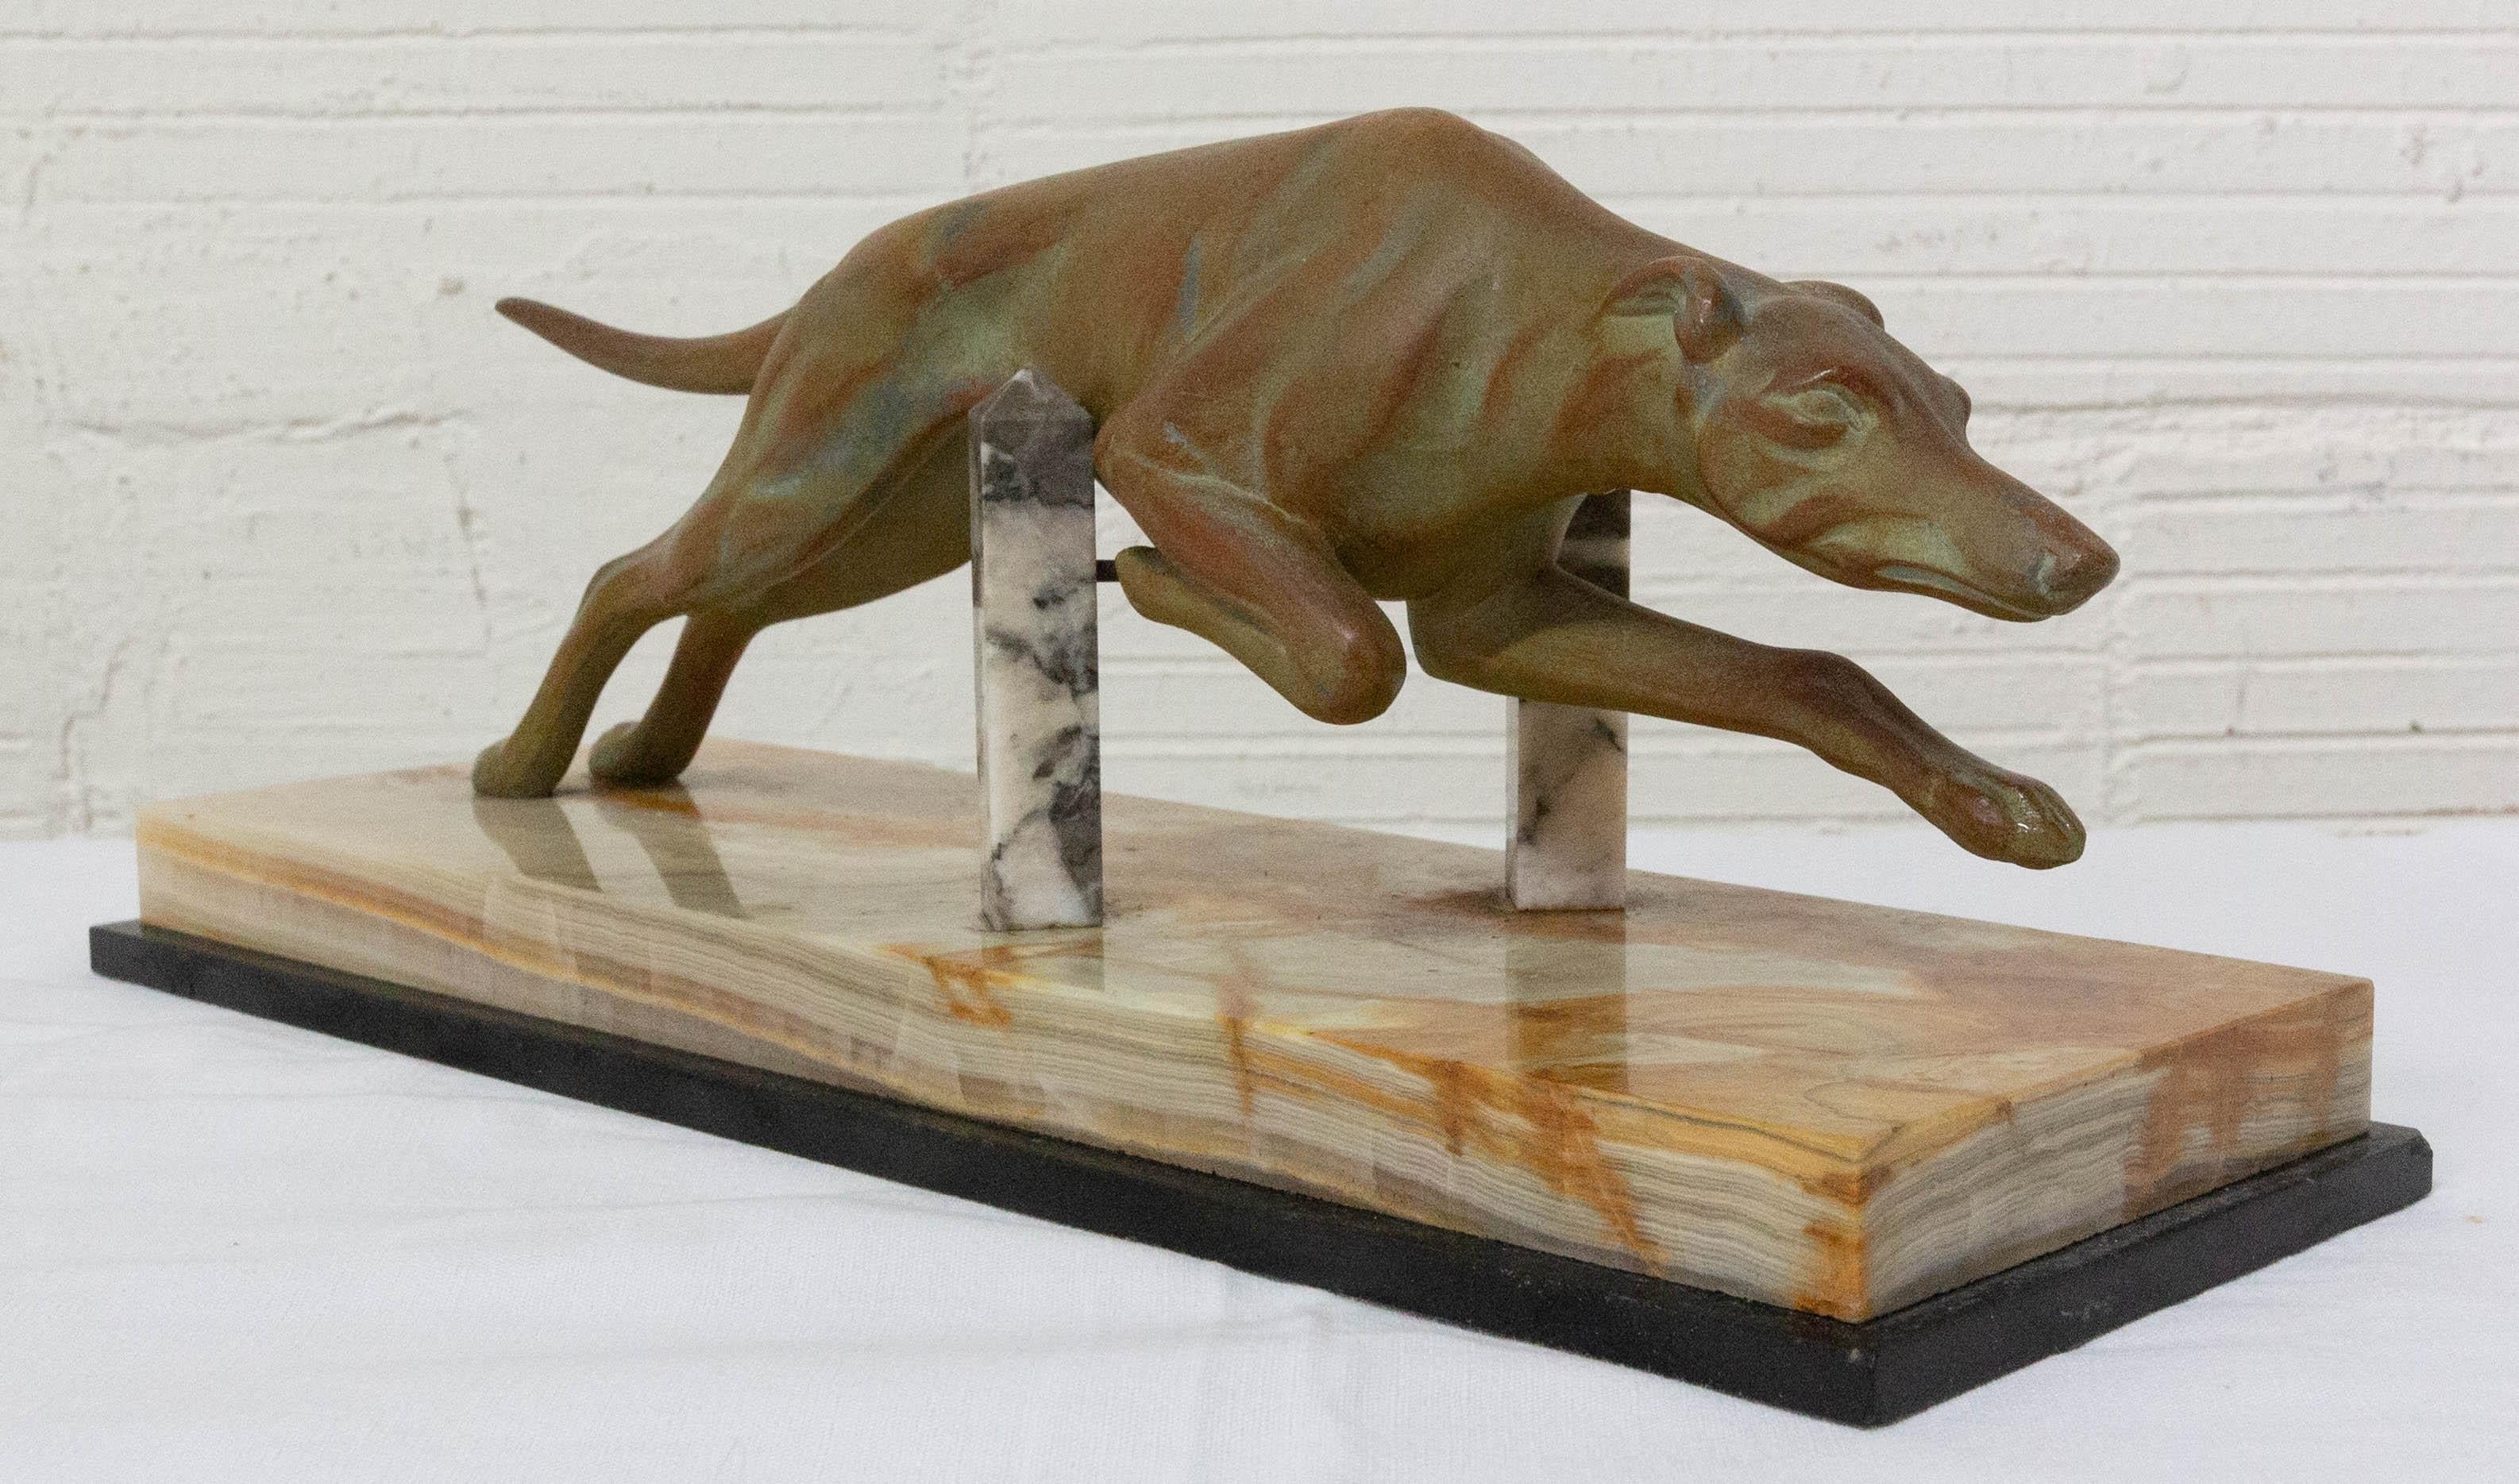 French Art Deco Greyhound
Marble and Patinated Spelter circa 1930
Good condition

Shipping:
P12/ L 35/ H 13.